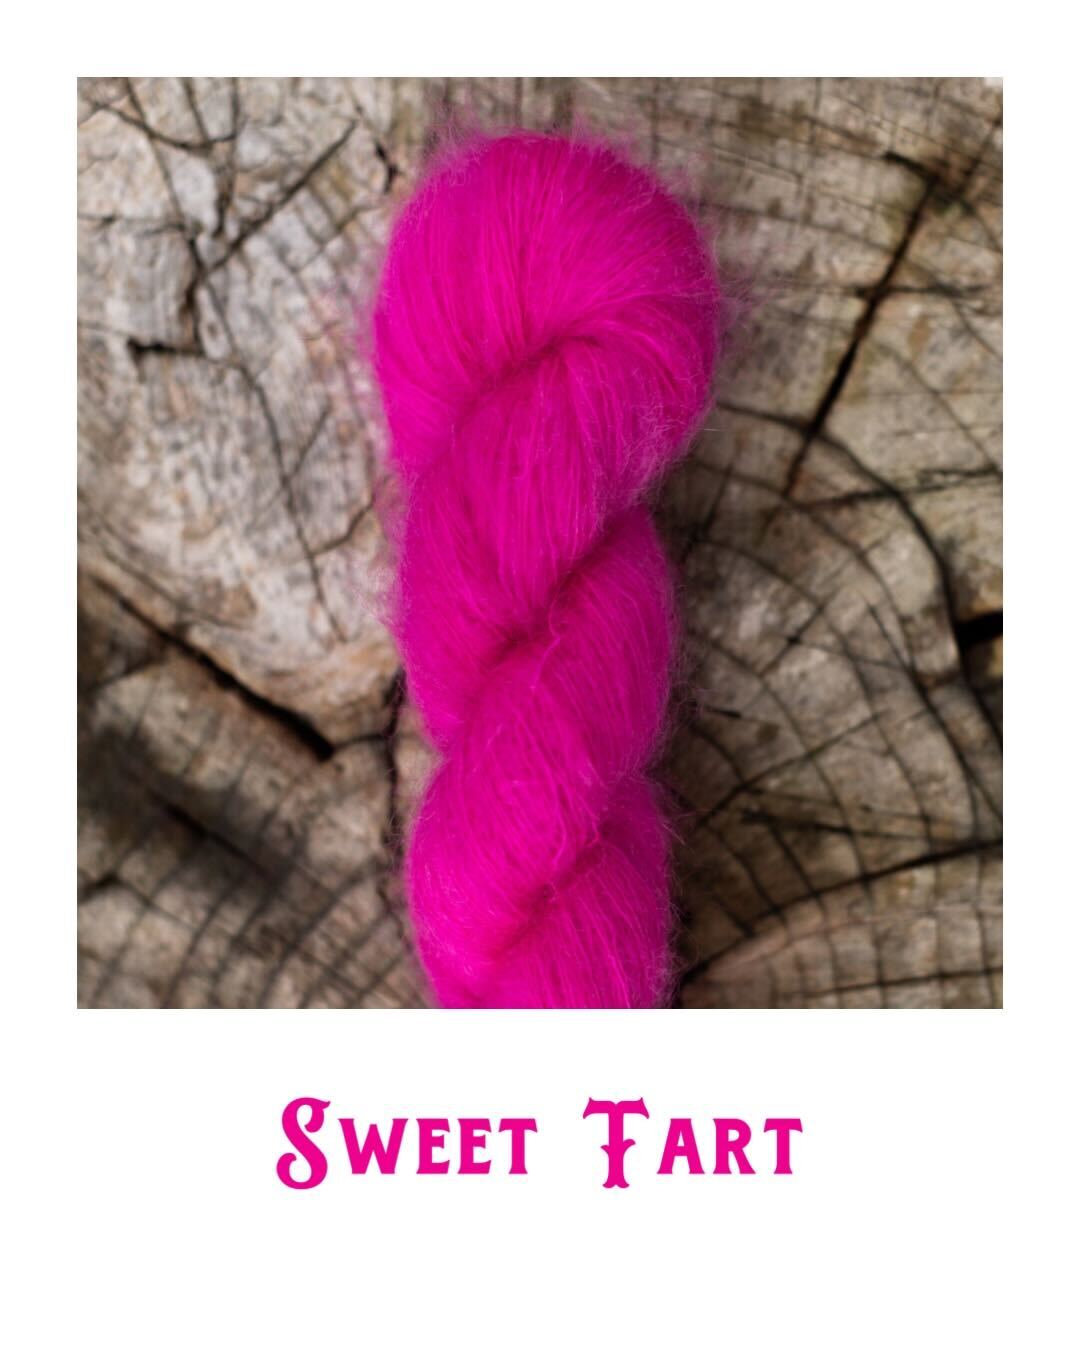 Tod Worsted: Hand Dyed